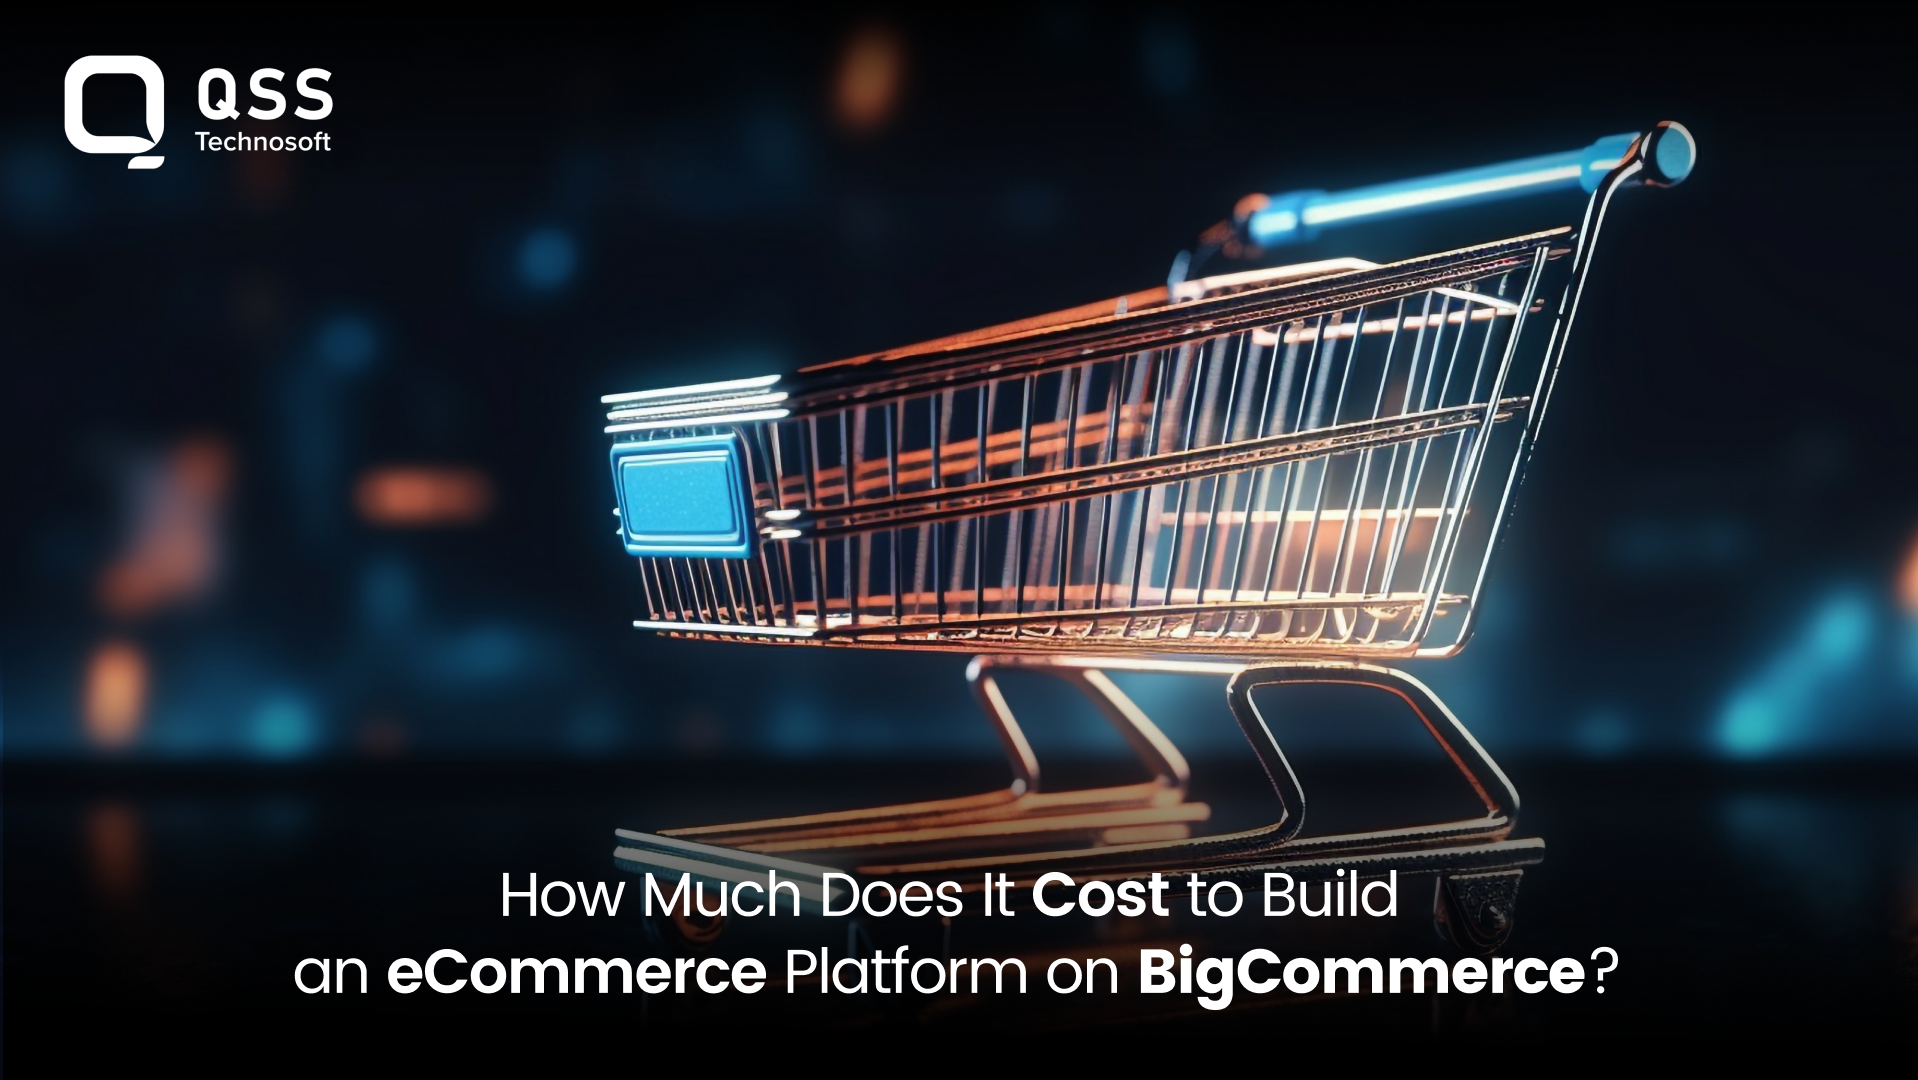 Cost to Build an eCommerce Platform on BigCommerce